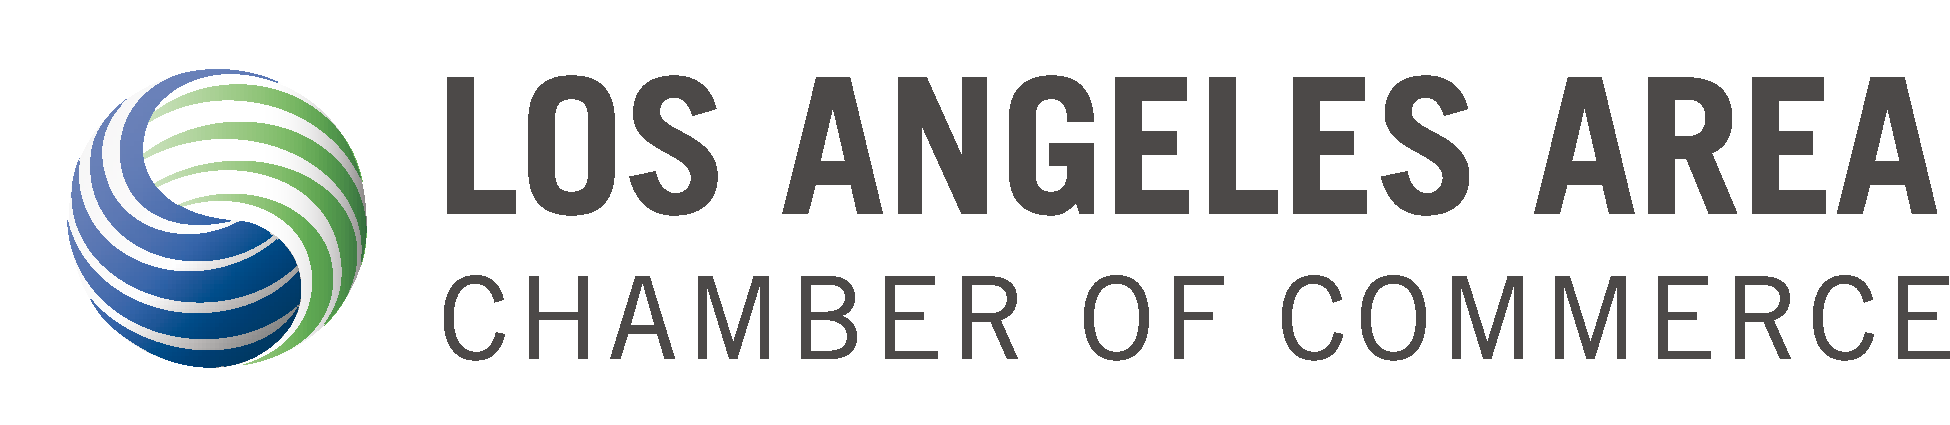 Los Angeles Area Chamber of Commerce Logo Vector